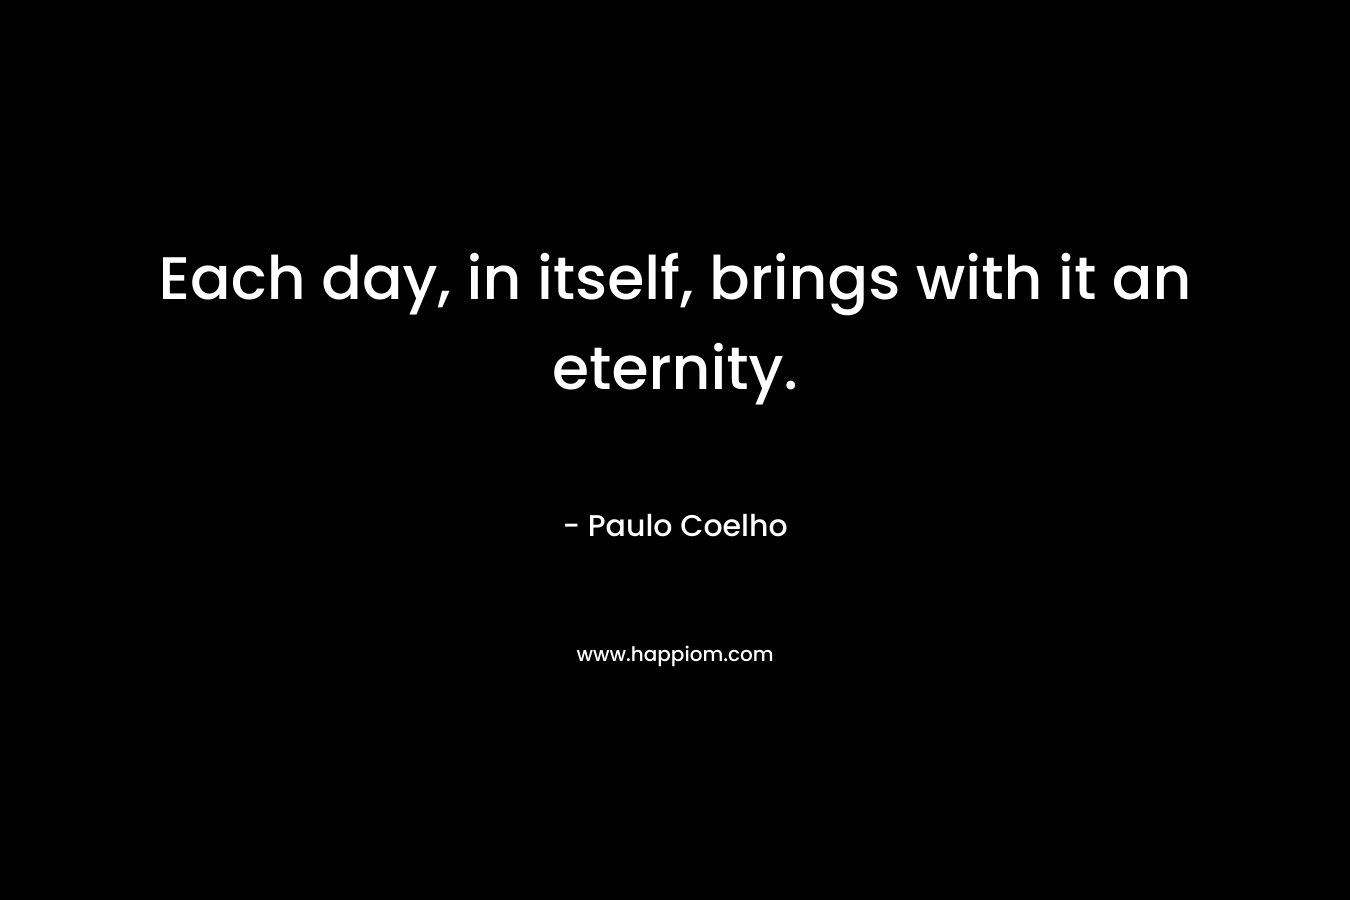 Each day, in itself, brings with it an eternity.